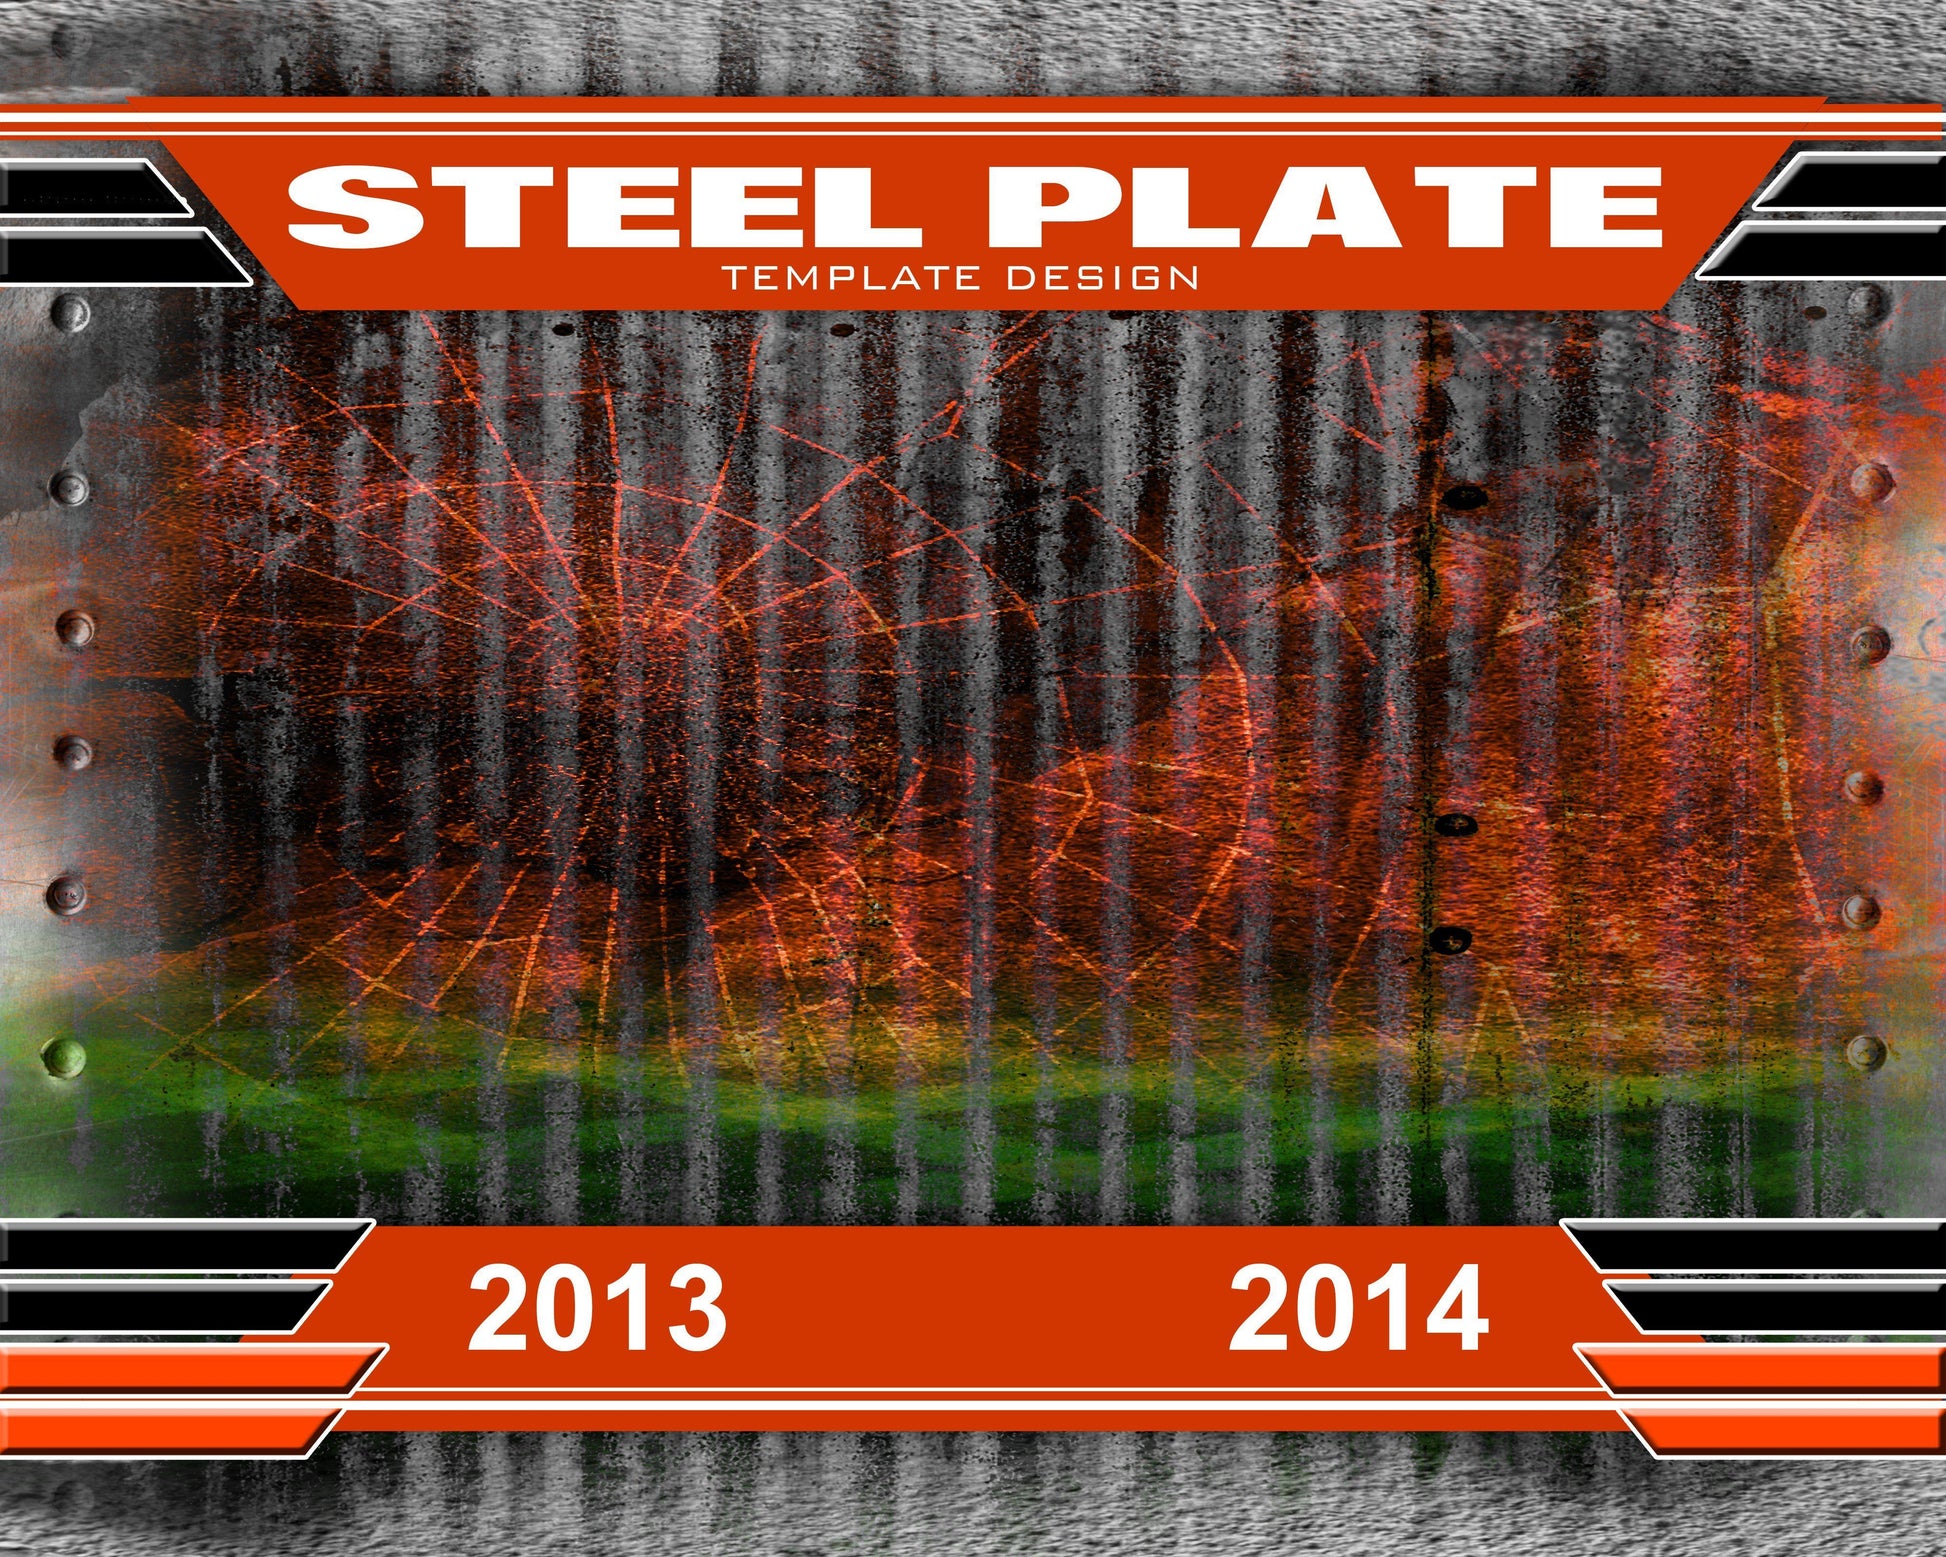 Steel Plate v.1 - Xtreme Team-Photoshop Template - Photo Solutions